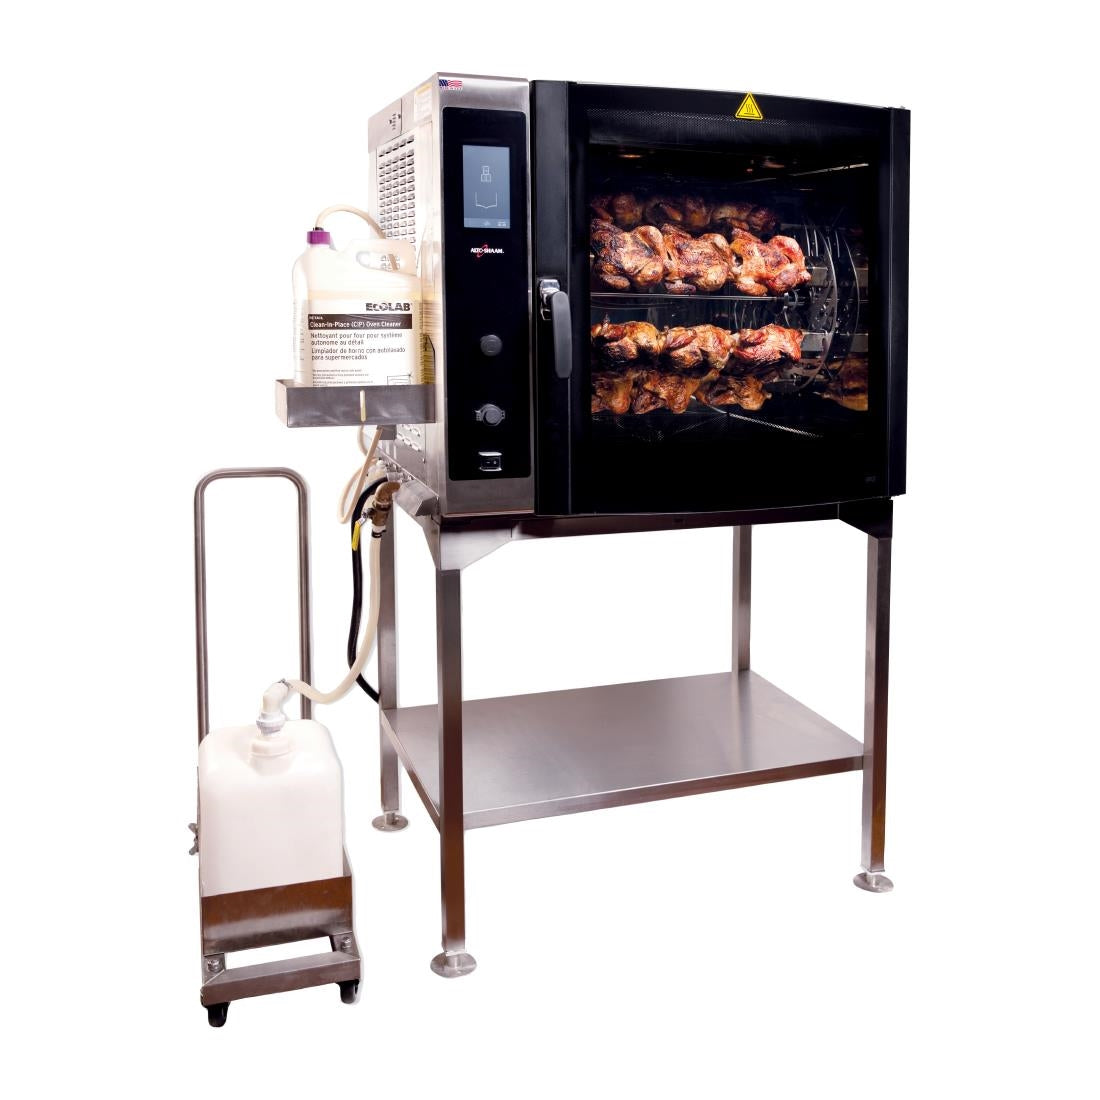 CK092 Alto-Shaam Self-Cleaning Electric Rotisserie AR-7T JD Catering Equipment Solutions Ltd